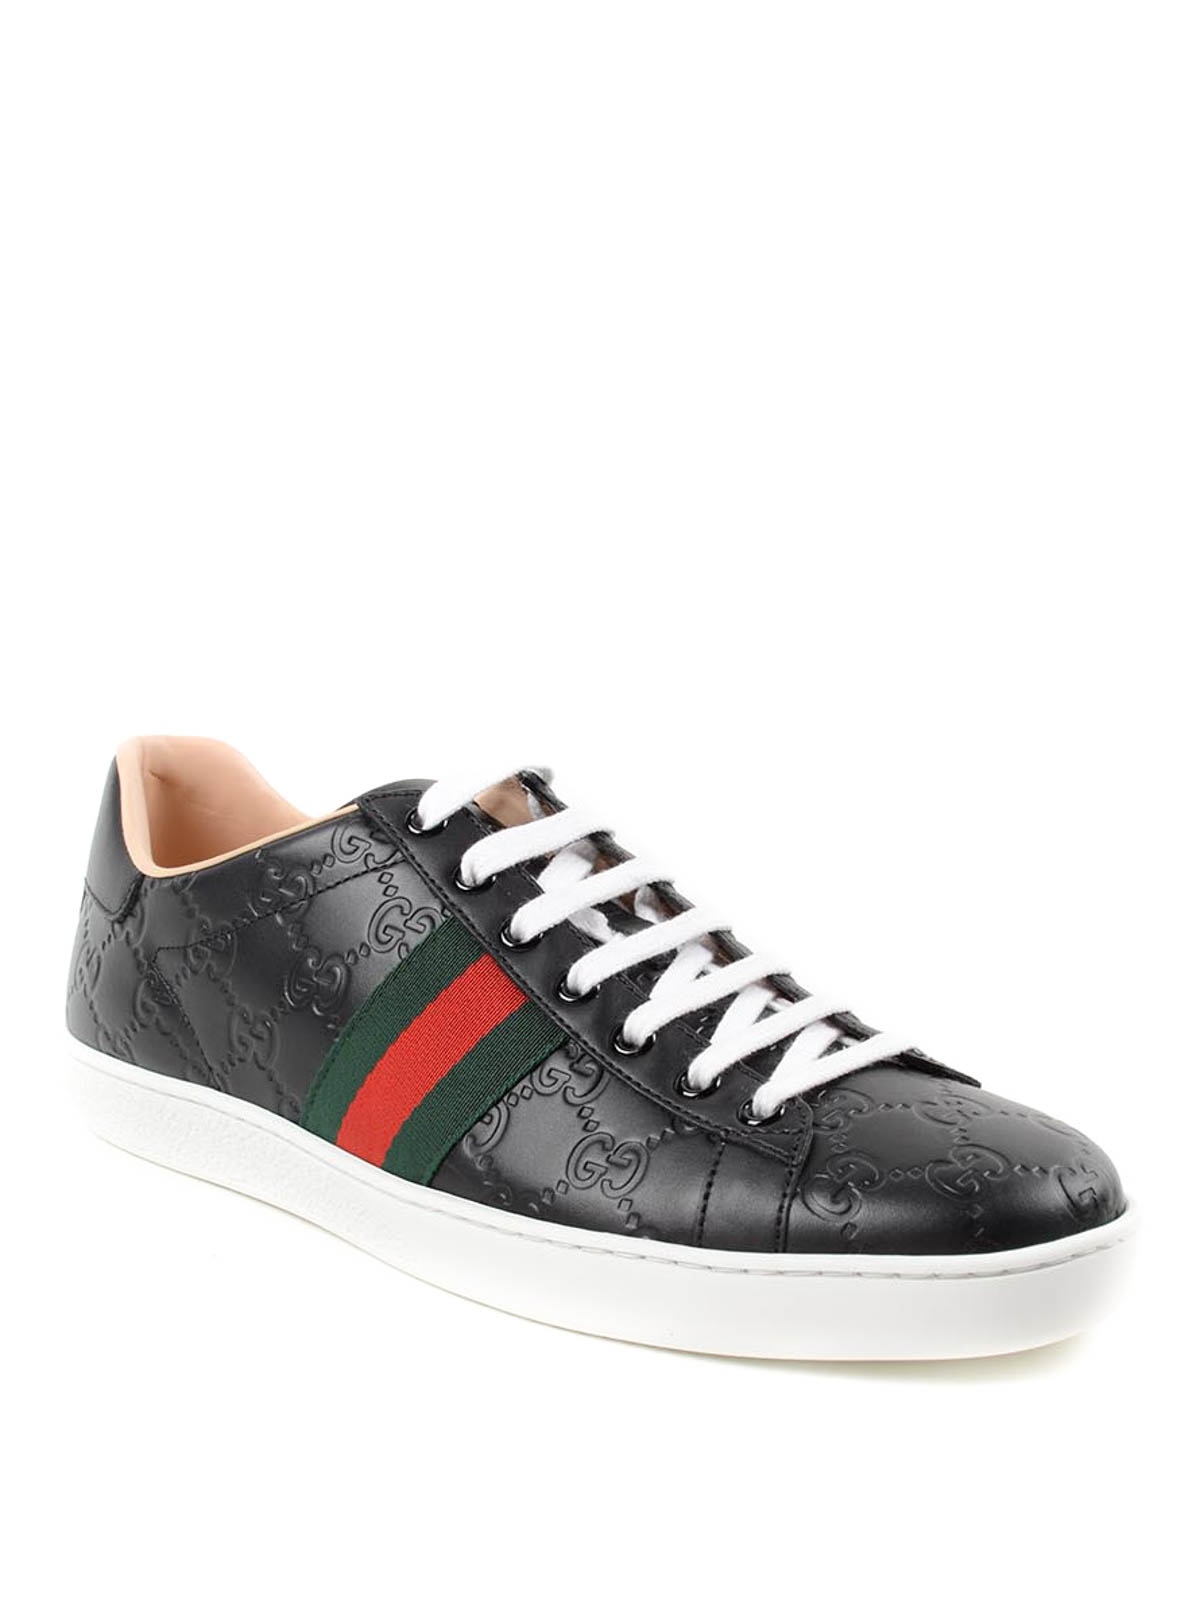 GG leather sneakers by Gucci - trainers | Shop online at comicsahoy.com